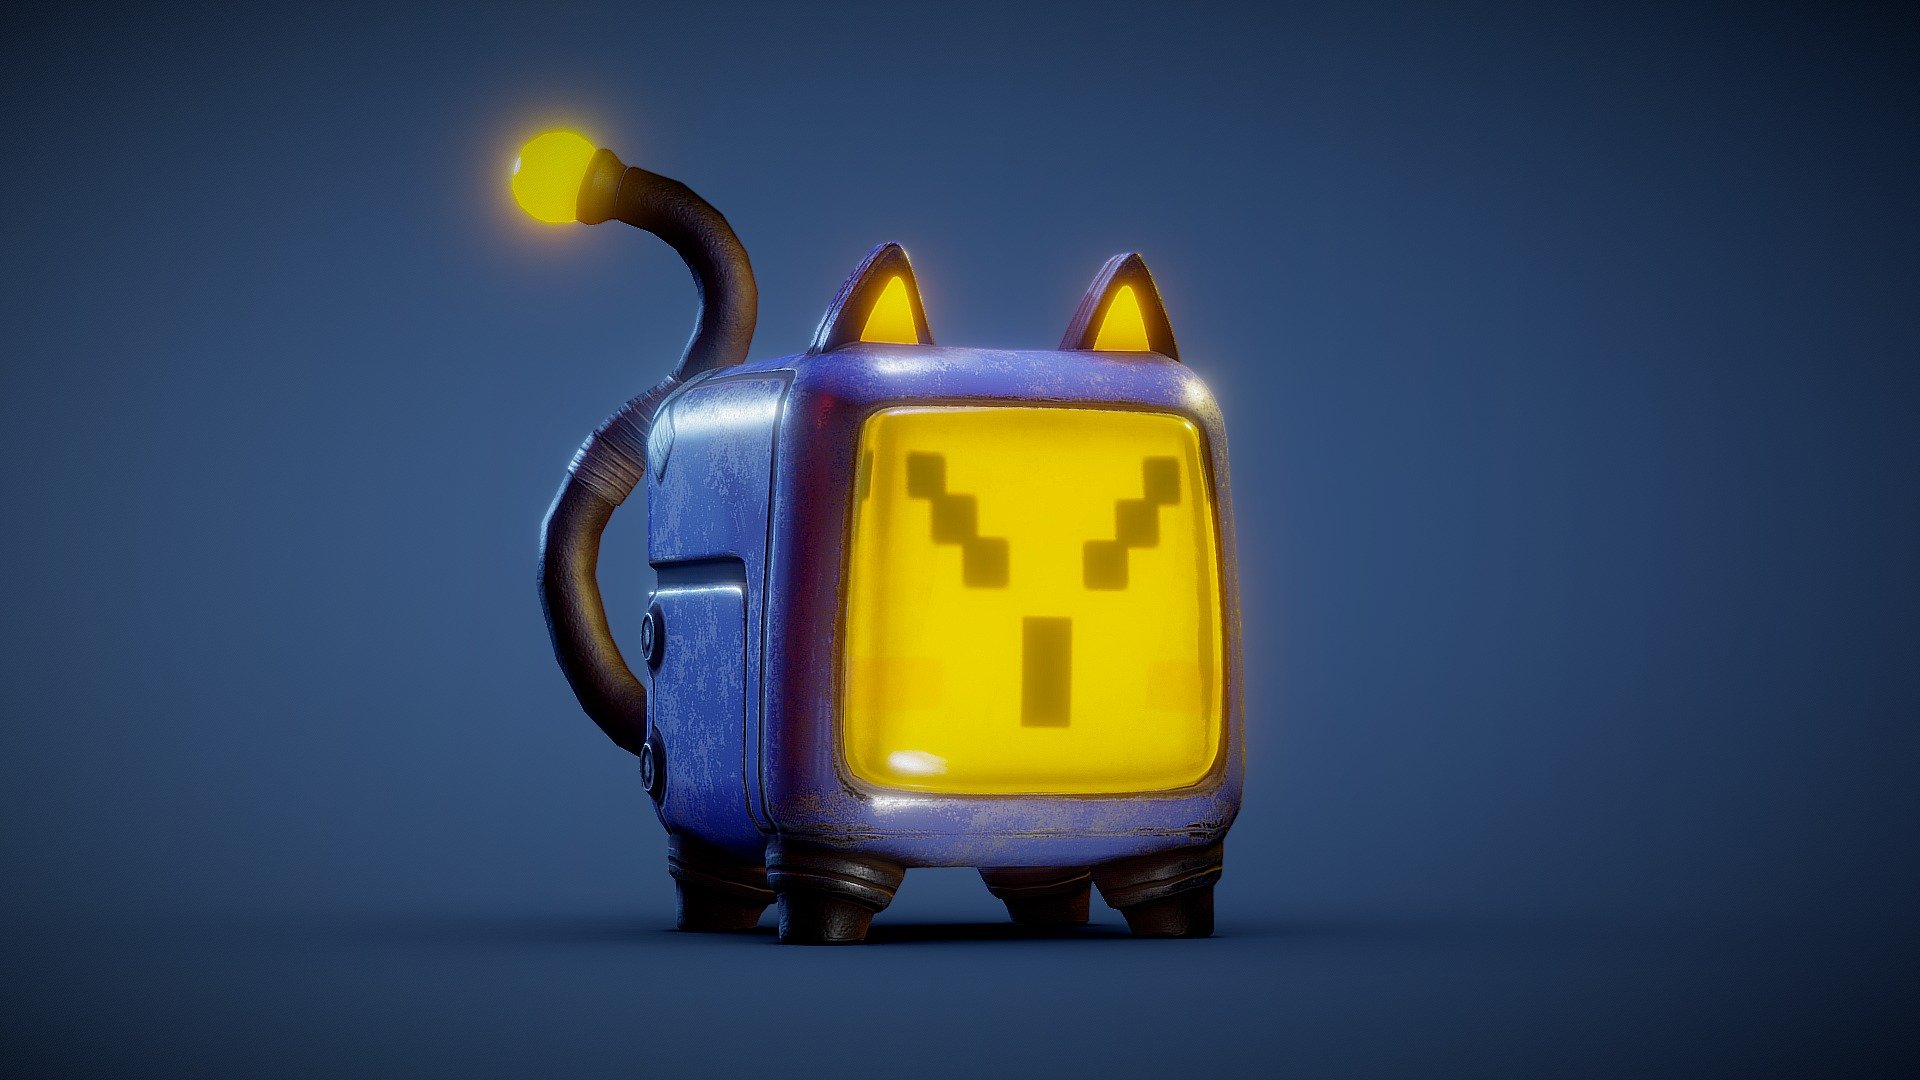 Simple robocat.

If you want to support the author, you can send donations to https://www.donationalerts.com/r/shedmon - RoboCat - Download Free 3D model by Shedmon 3d model